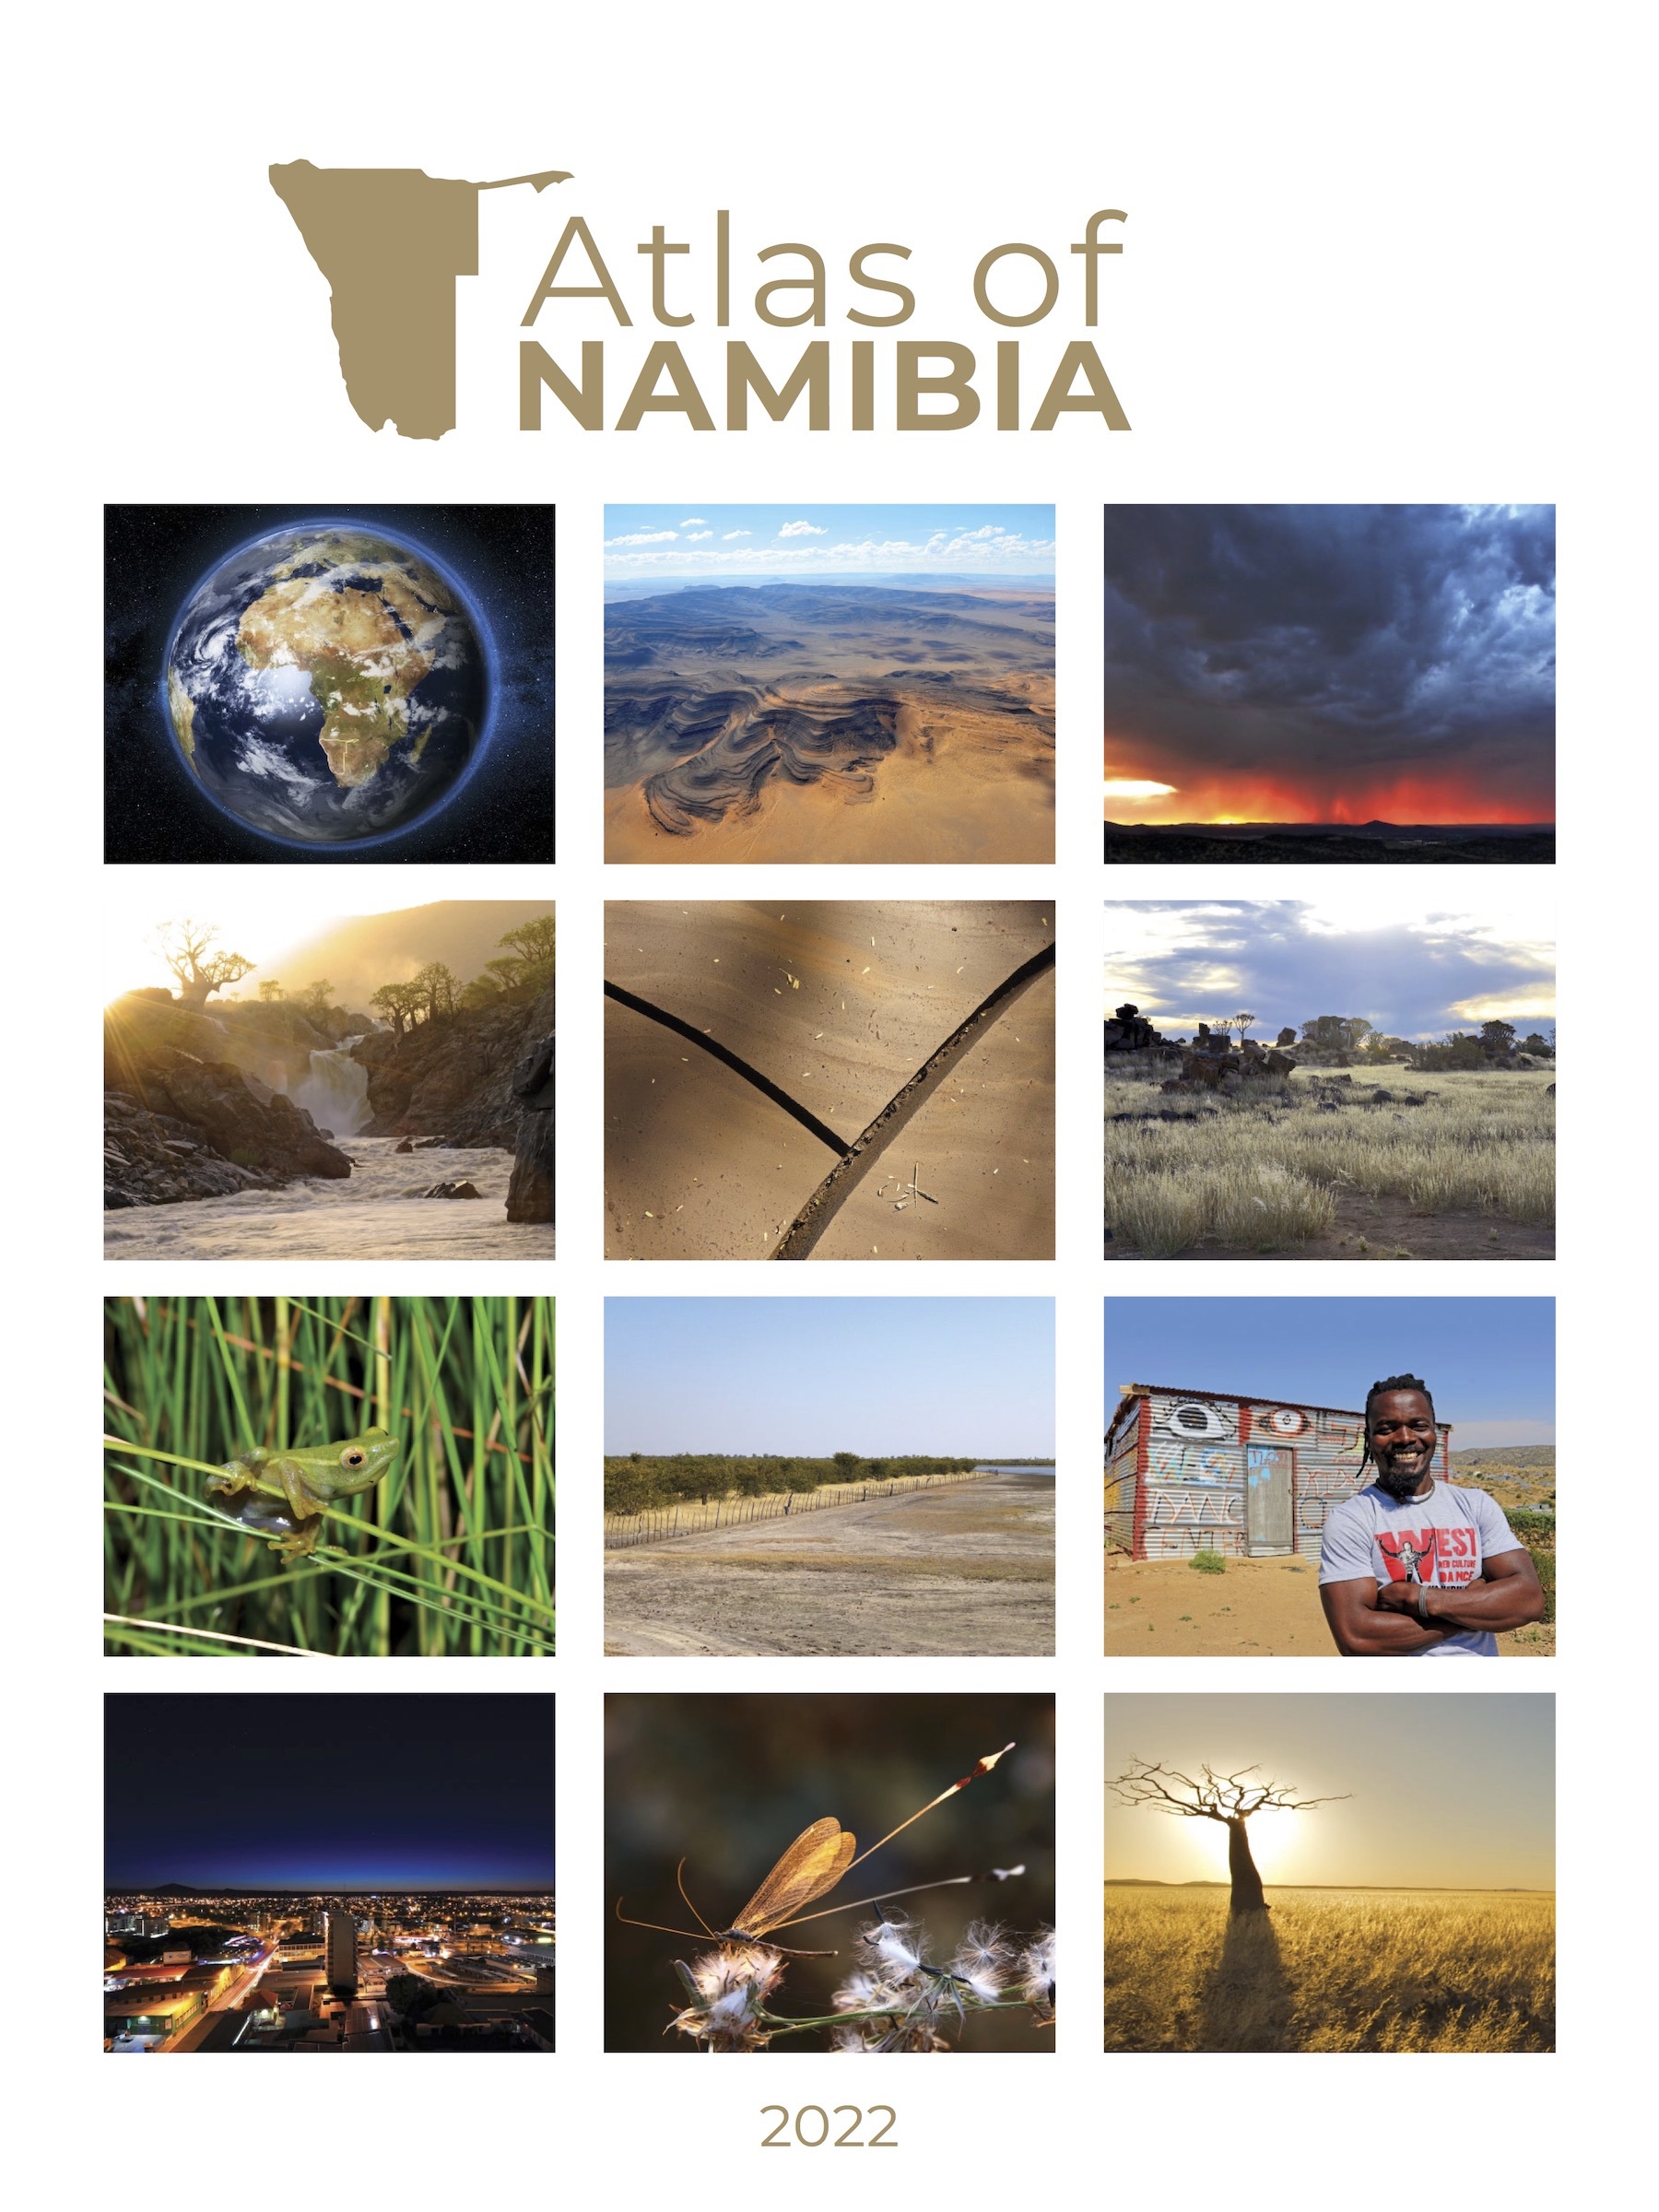 An example page from the Atlas of Namibia.